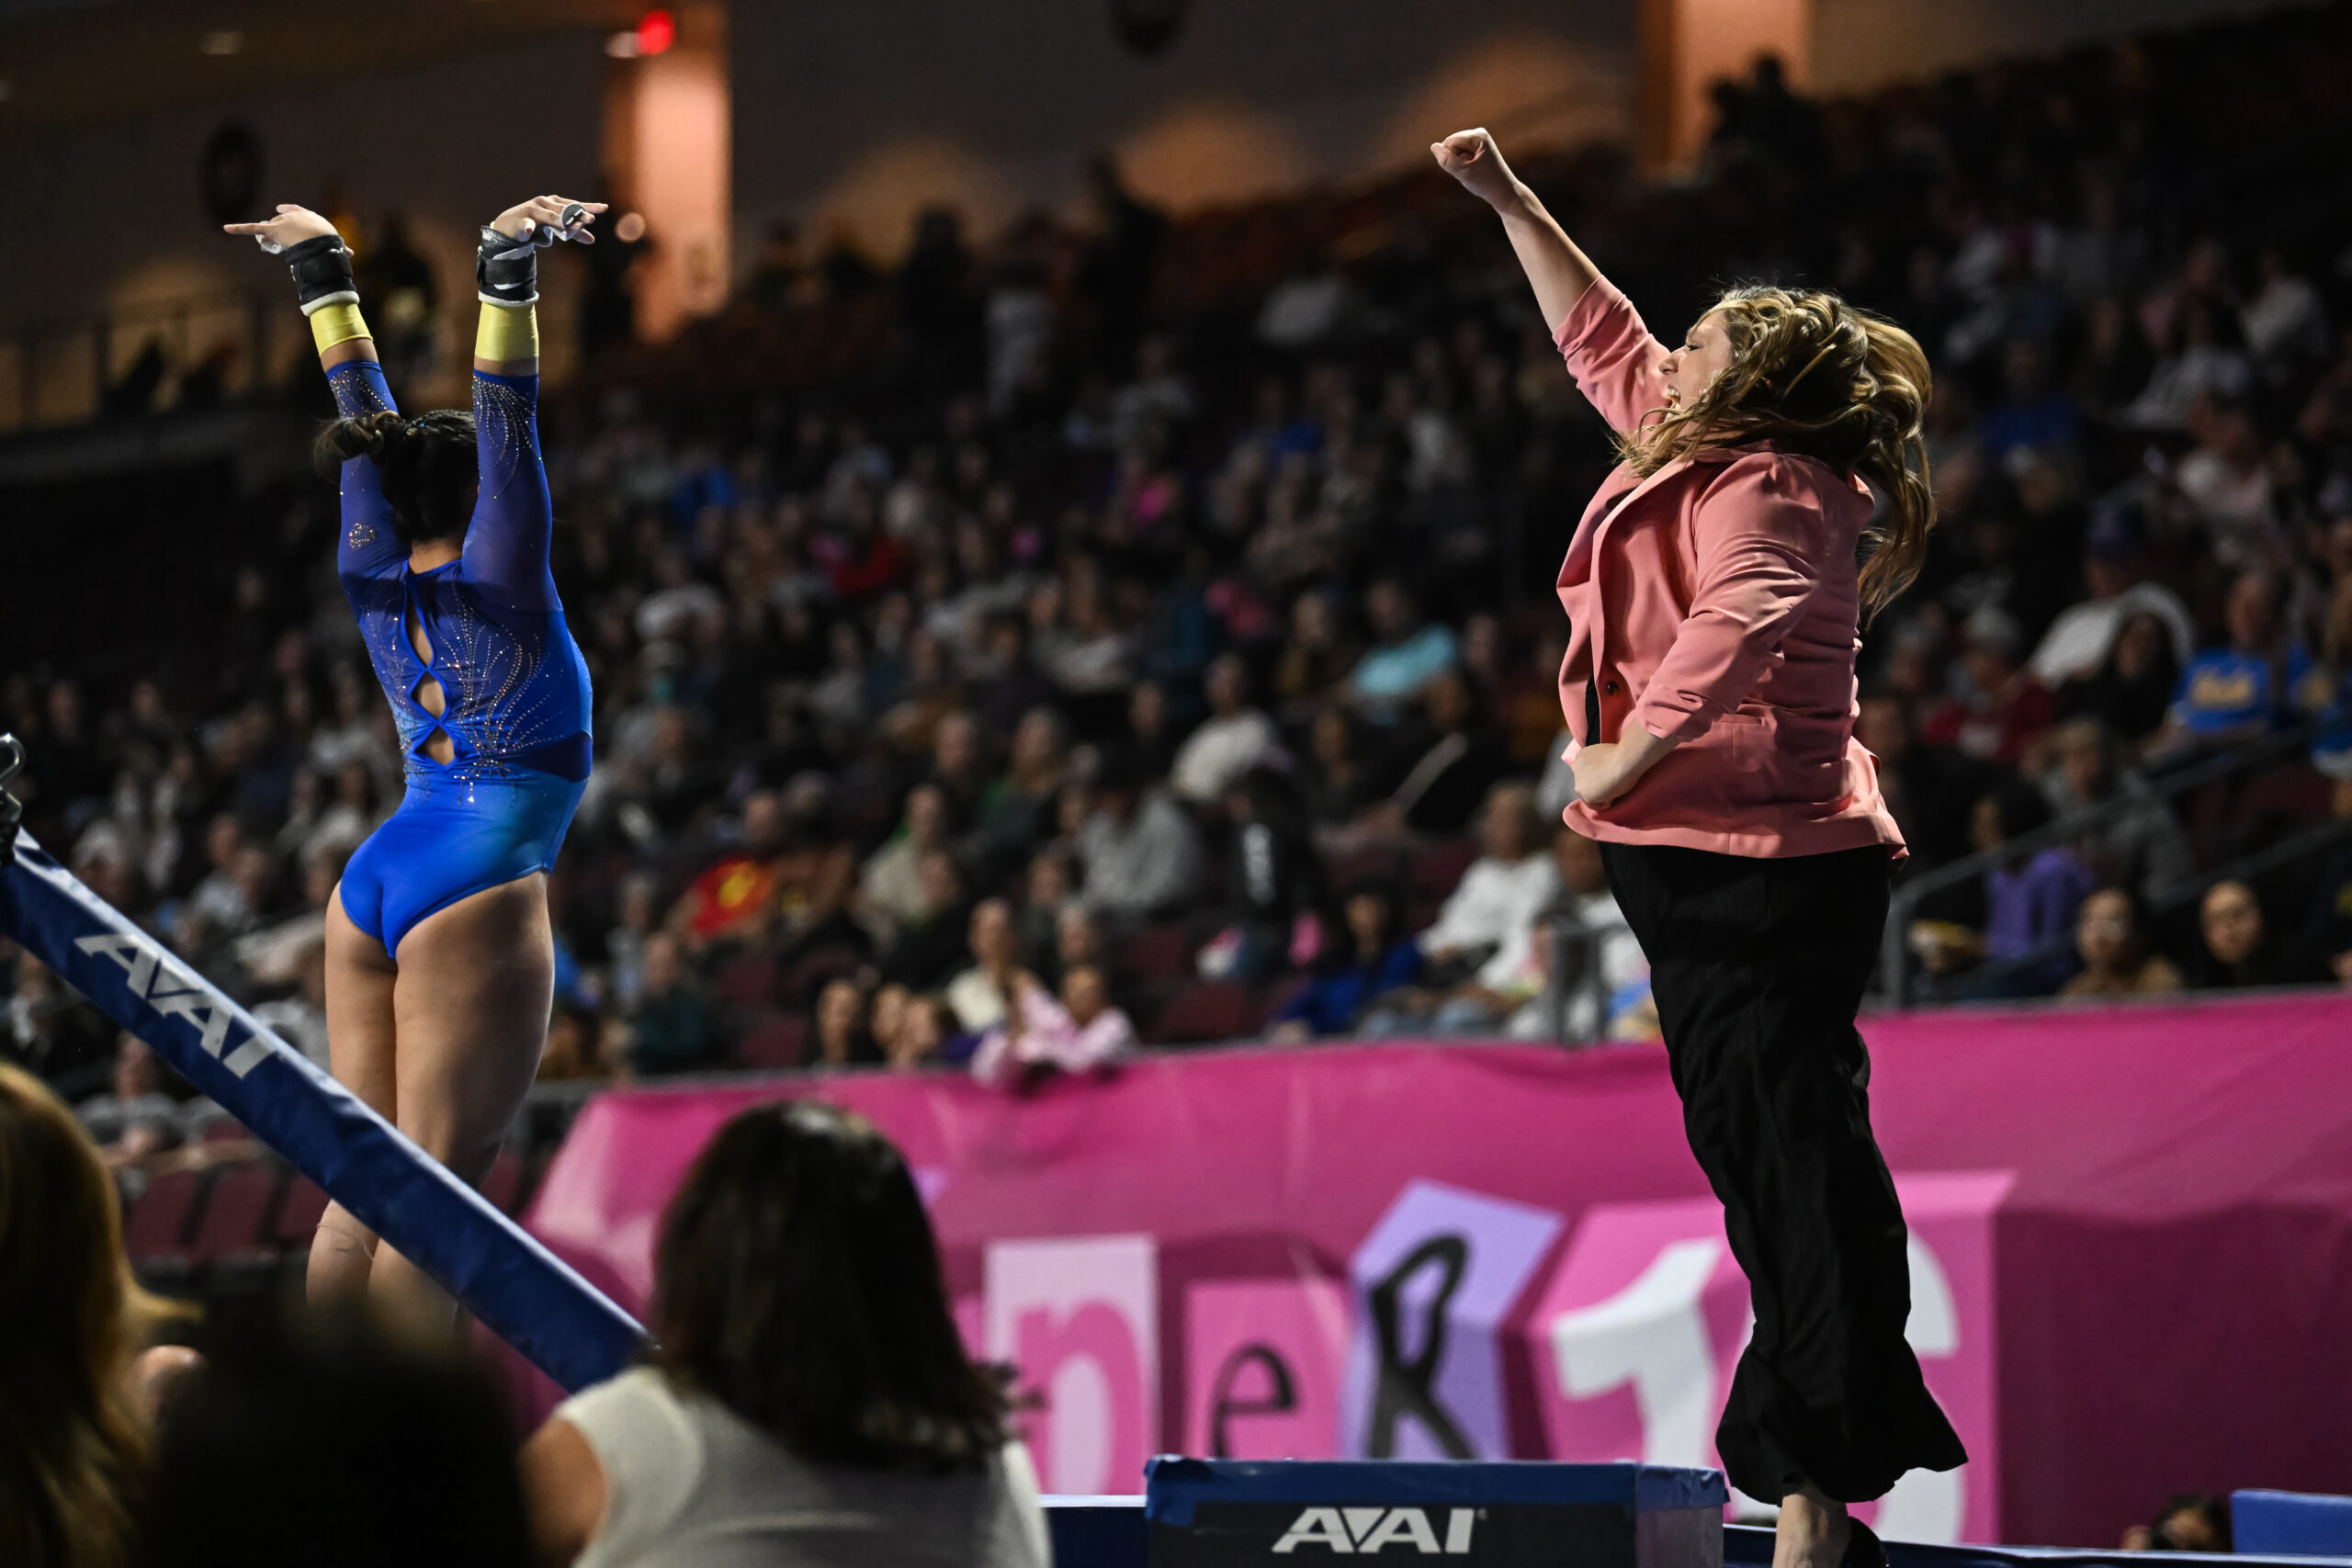 UCLA gymnastics head coach Janelle McDonald reacts after Emma Malabuyo’s bars routine at the 2024 Mean Girls Super 16.